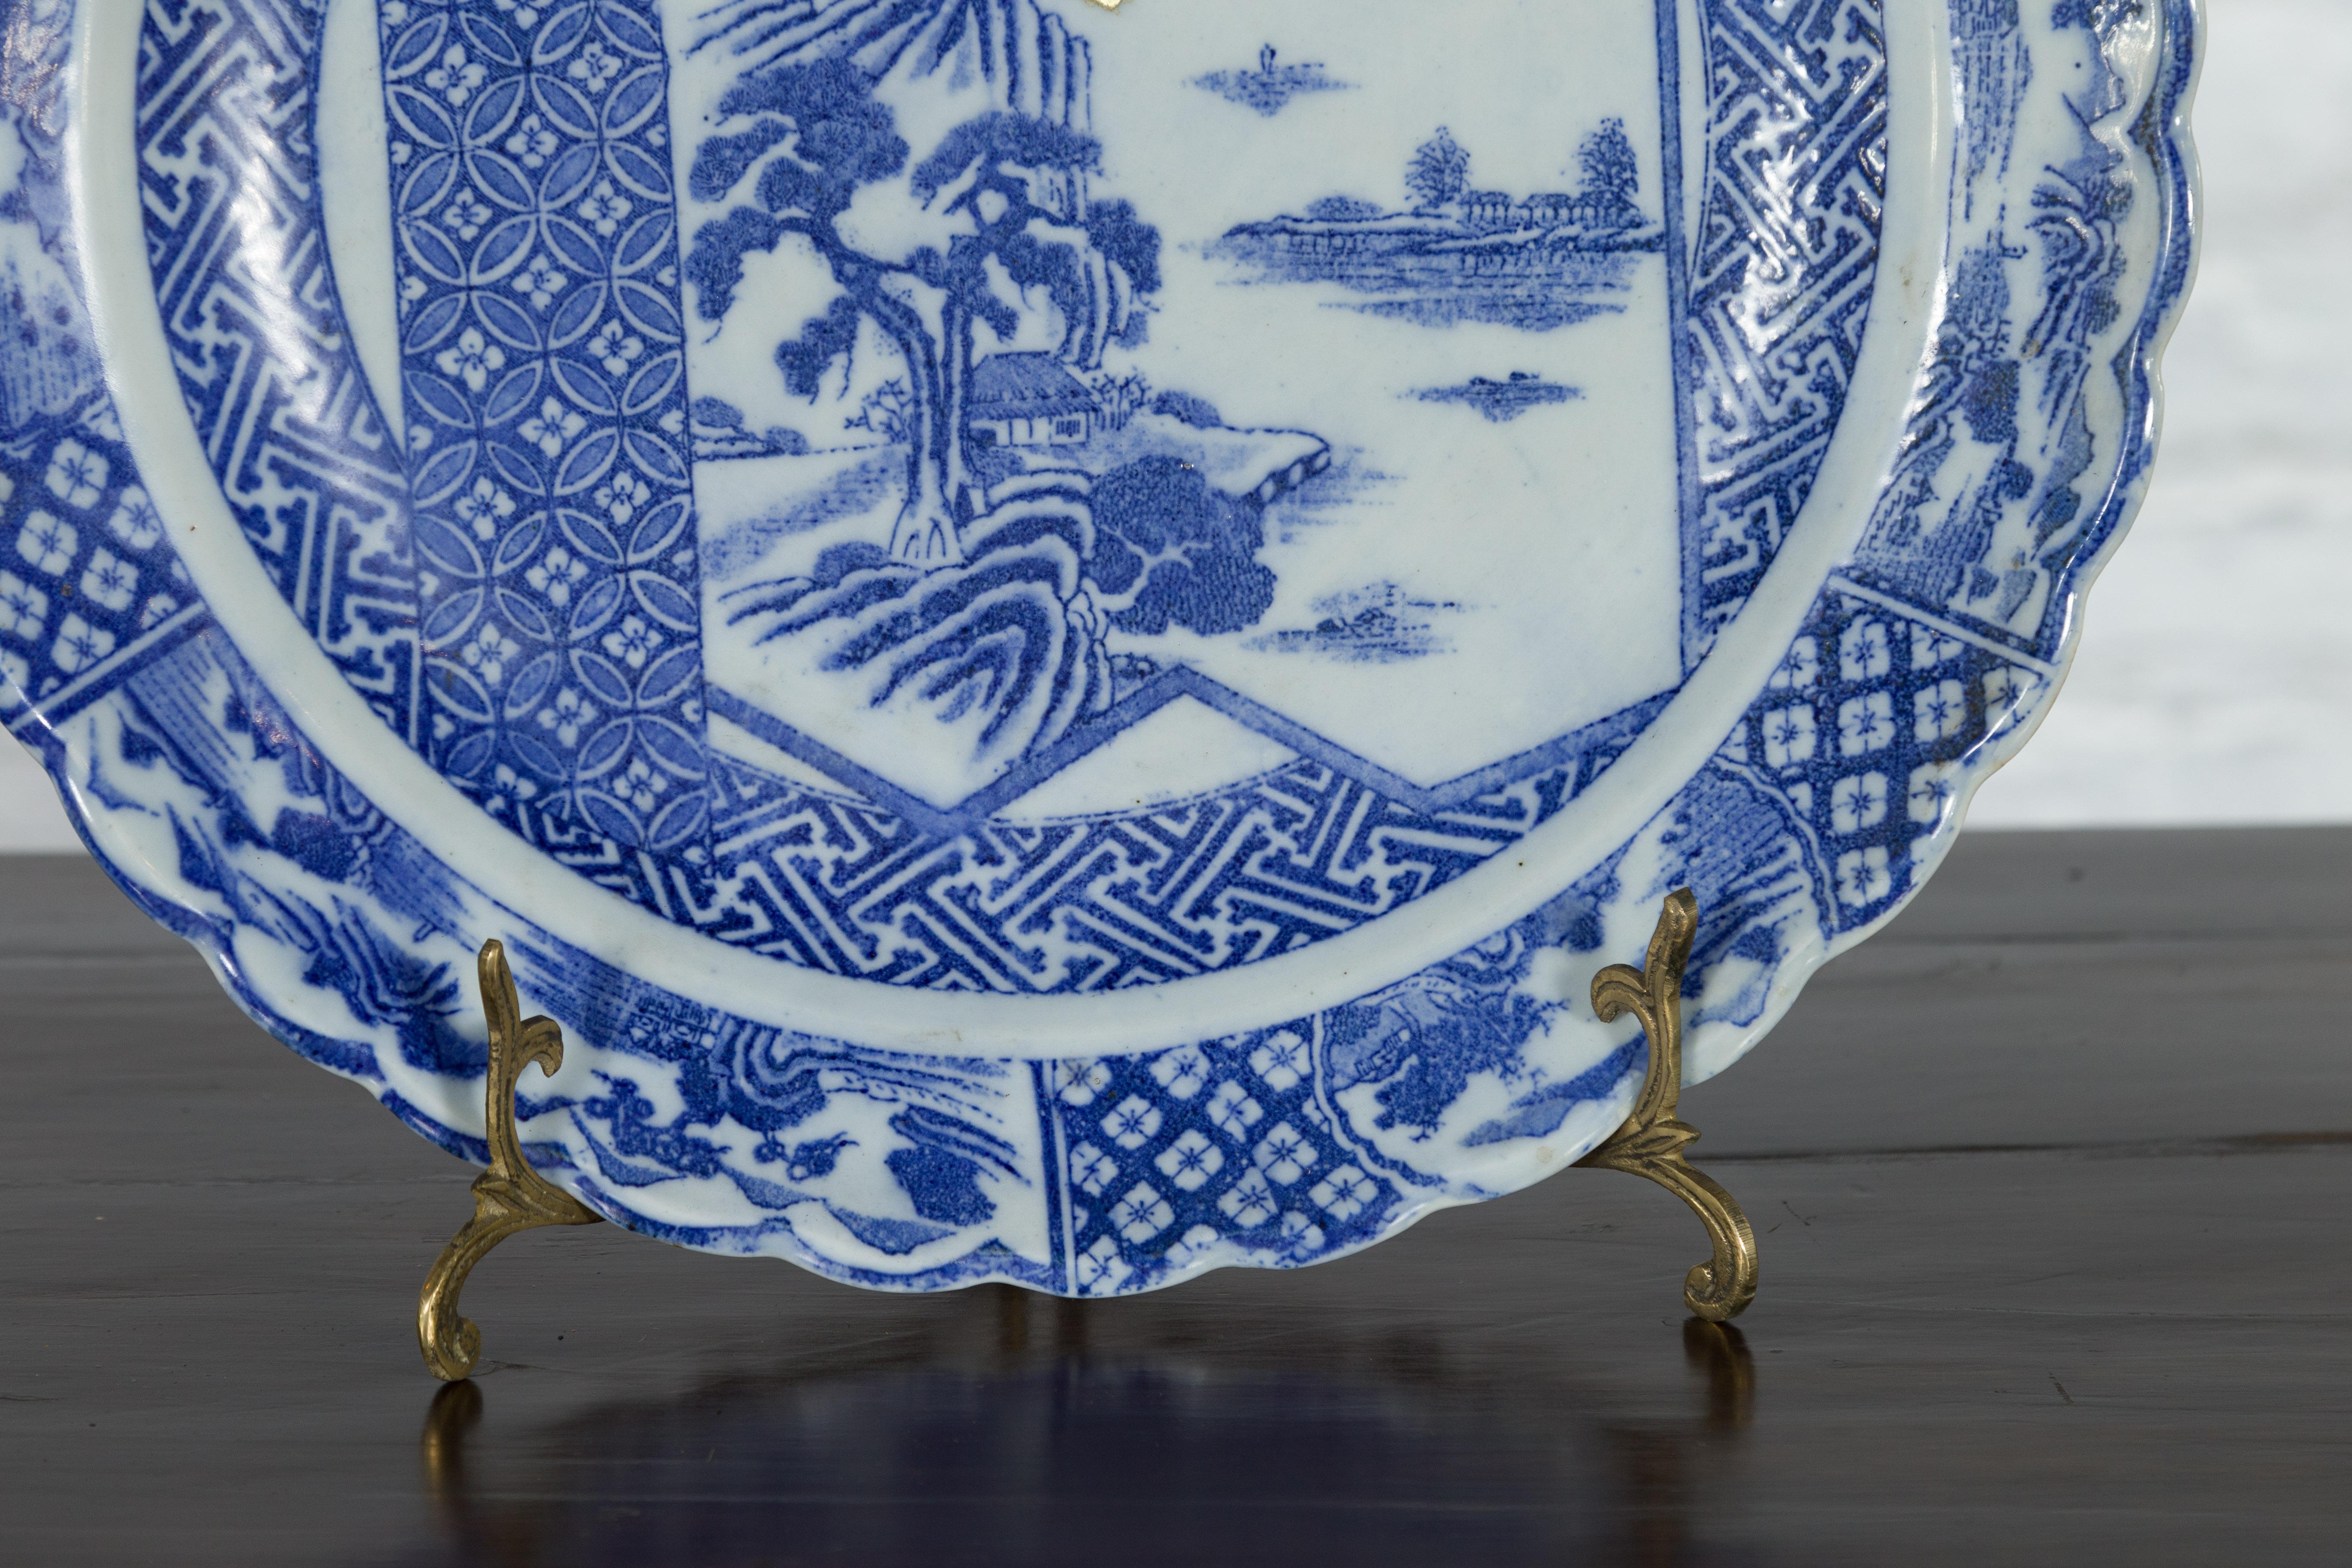 Japanese 19th Century Blue and White Porcelain Plate with Landscapes and Flowers For Sale 2